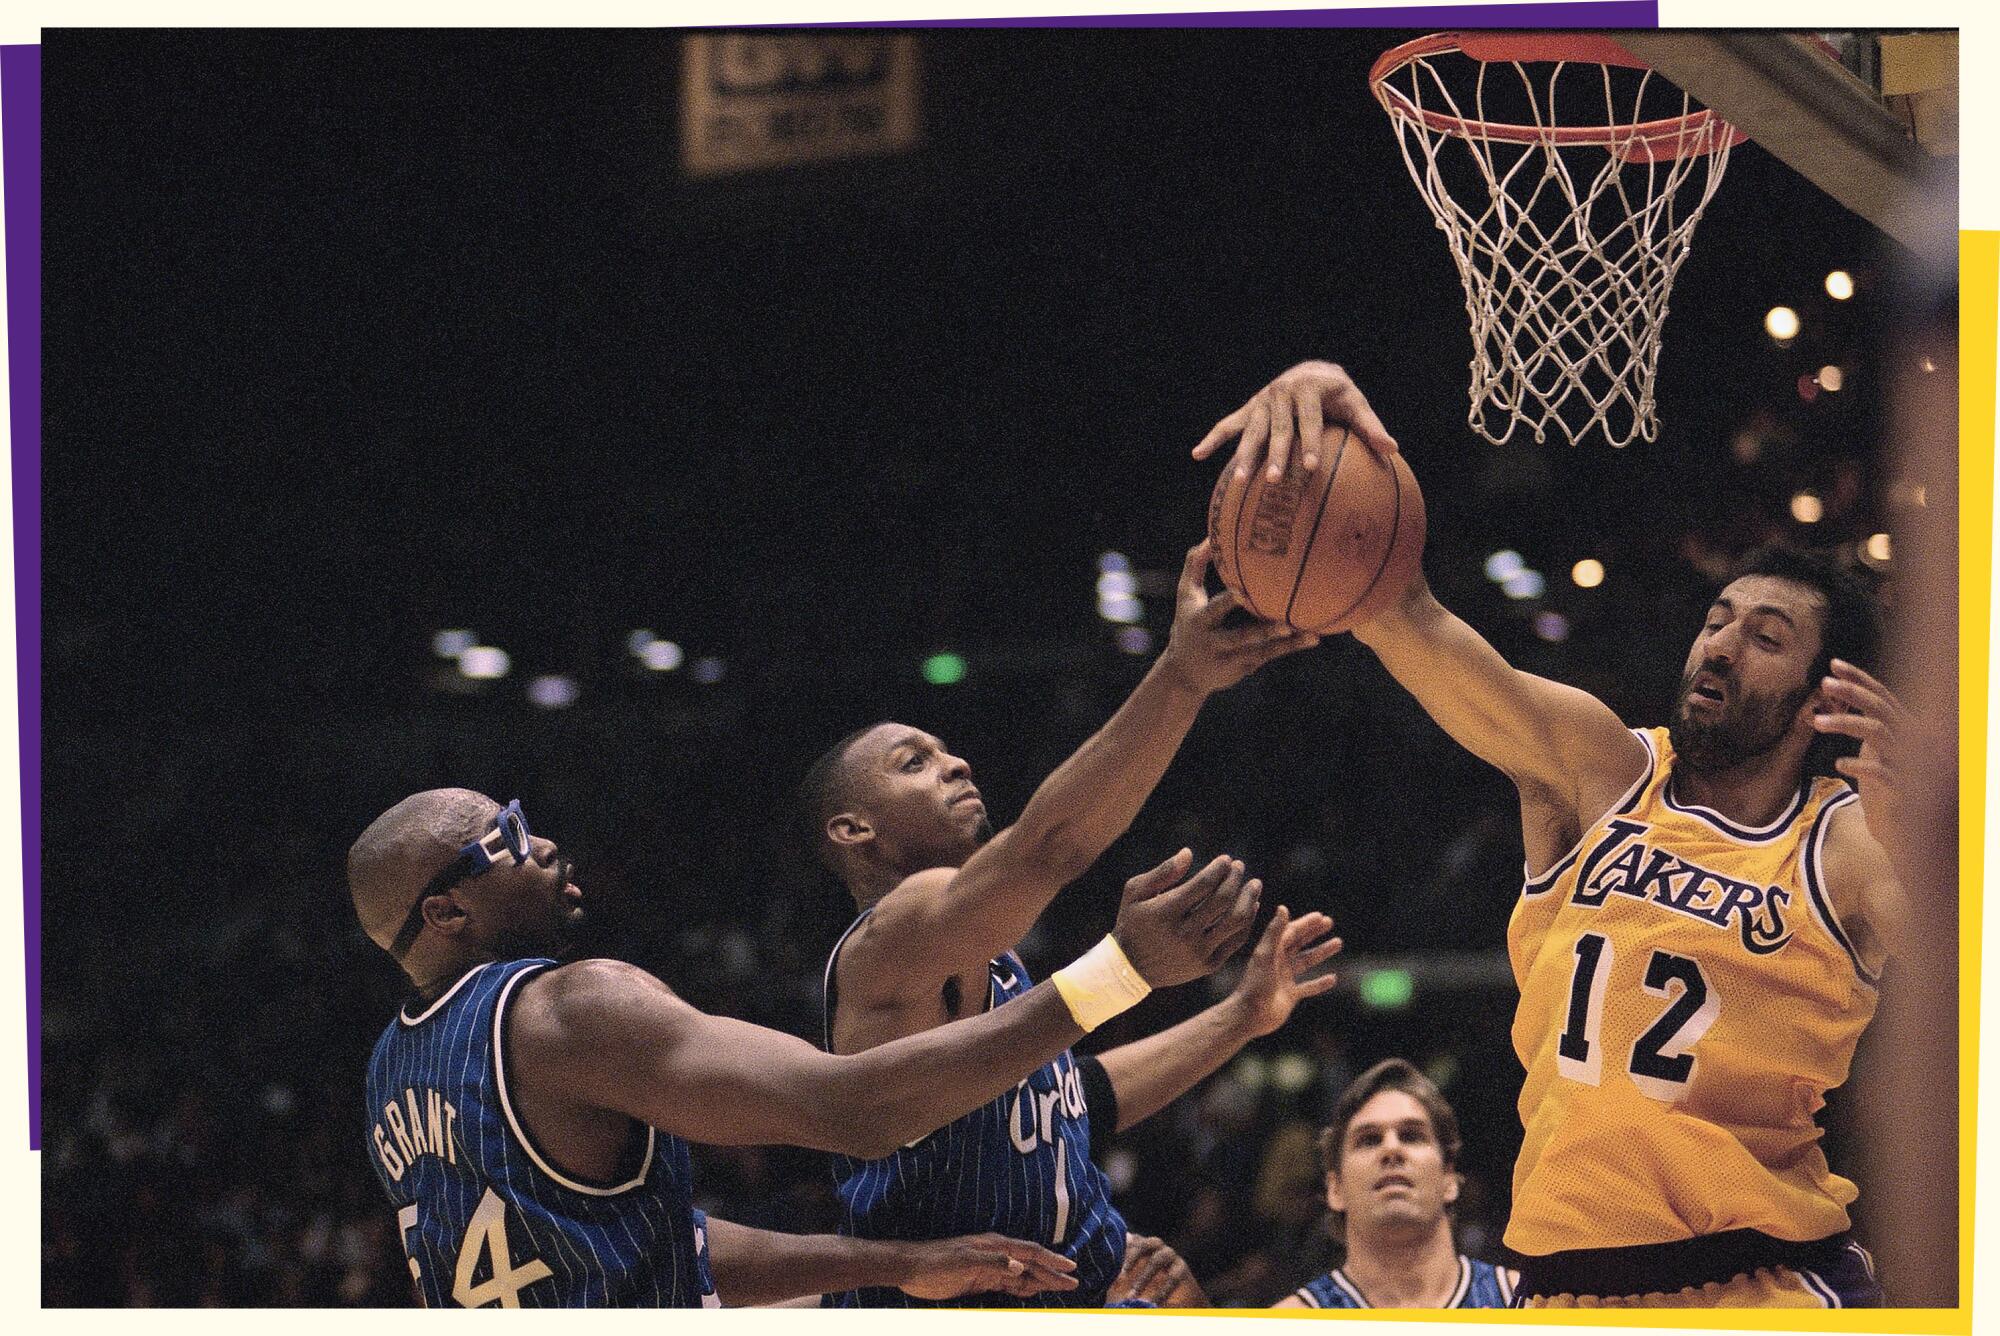 A photo of a player in a yellow jersey on right grabbing a ball under a basket as two other players reach for the ball.